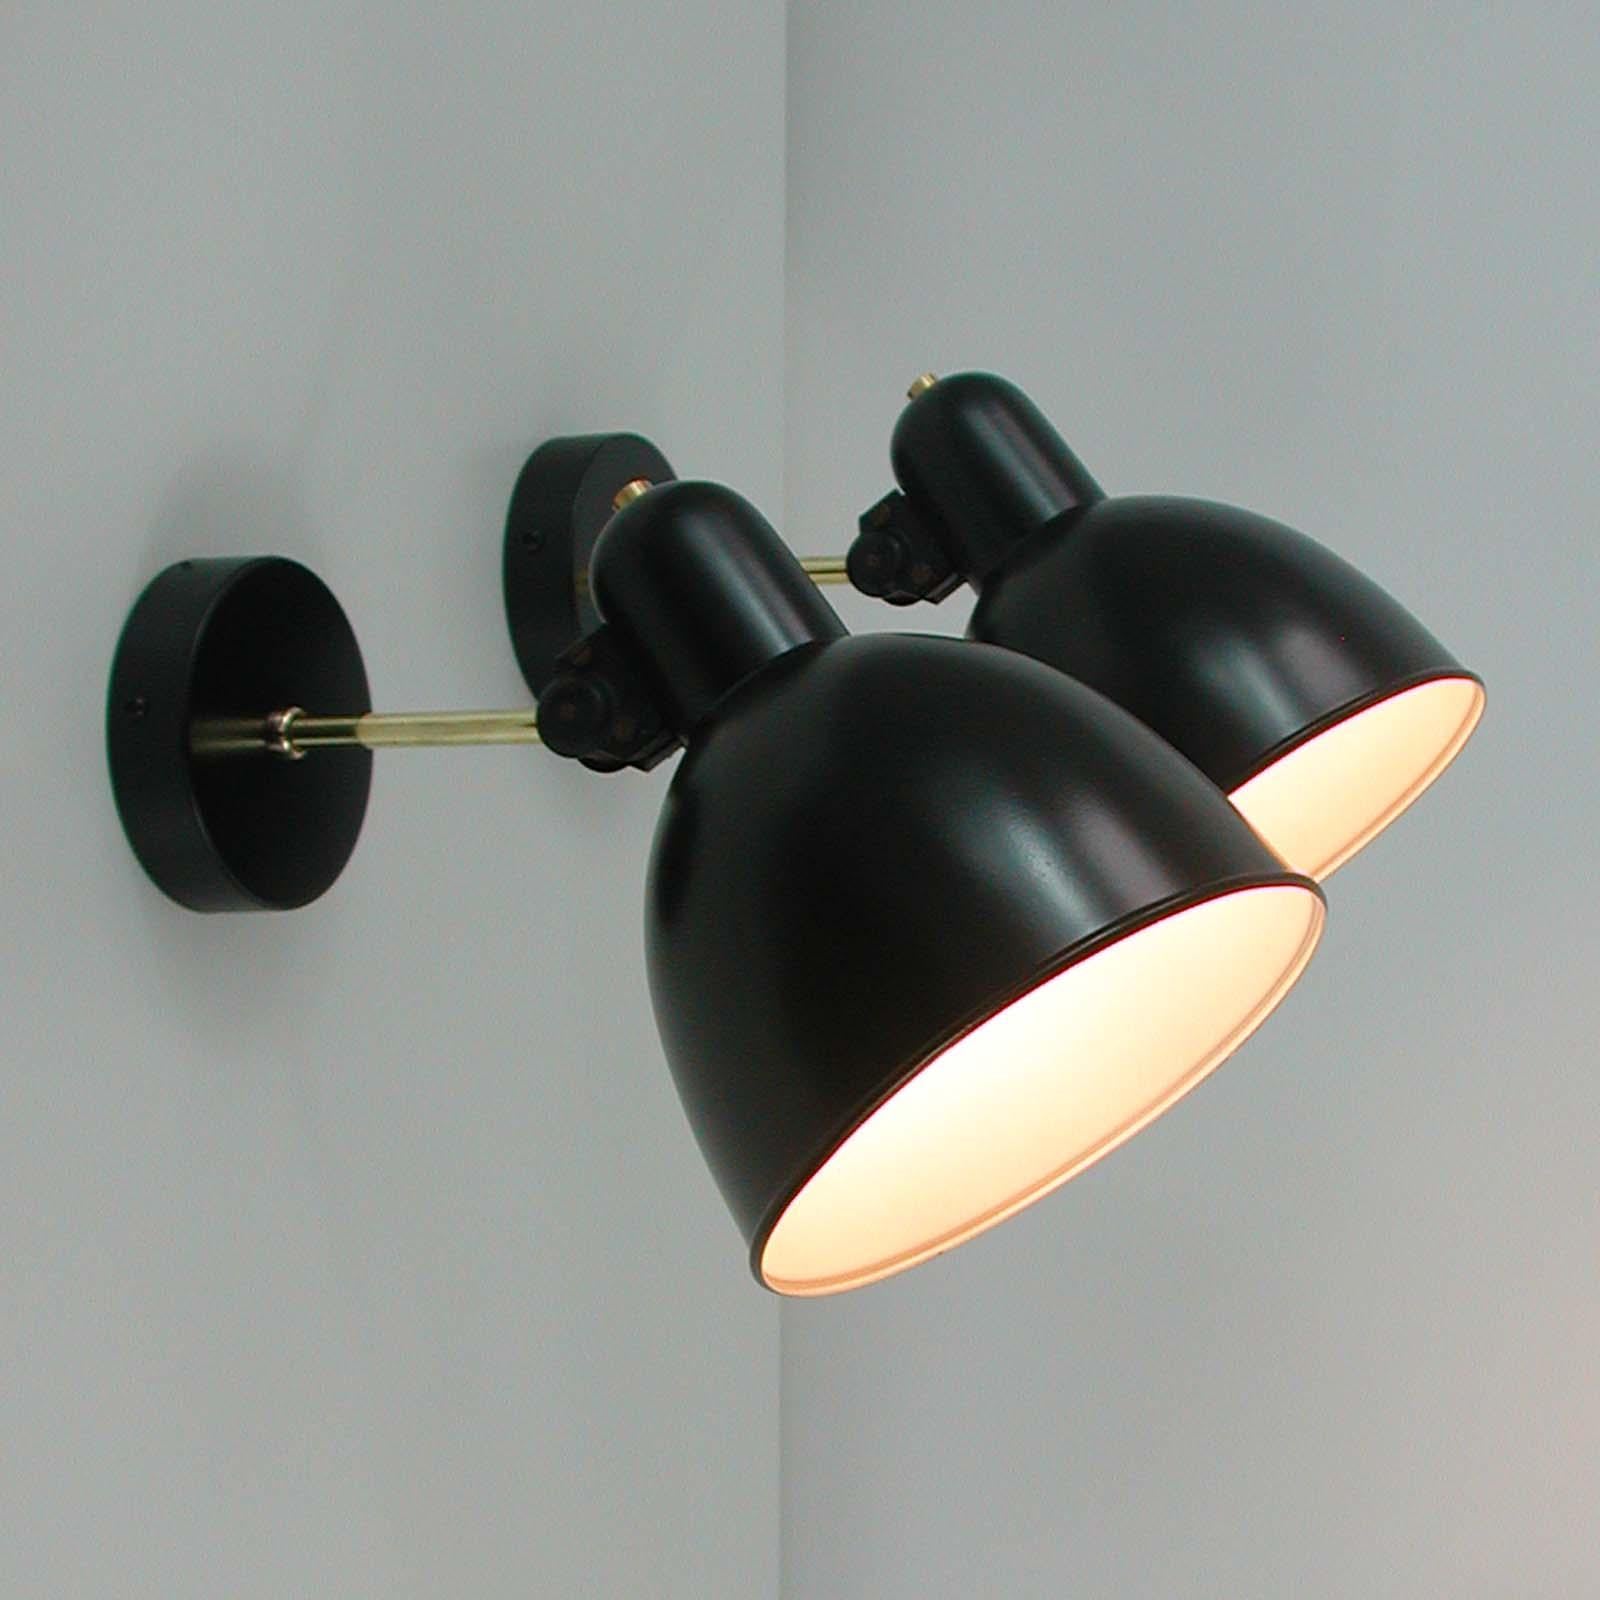 Lacquered German Bauhaus Industrial Wall Lights, 1930s